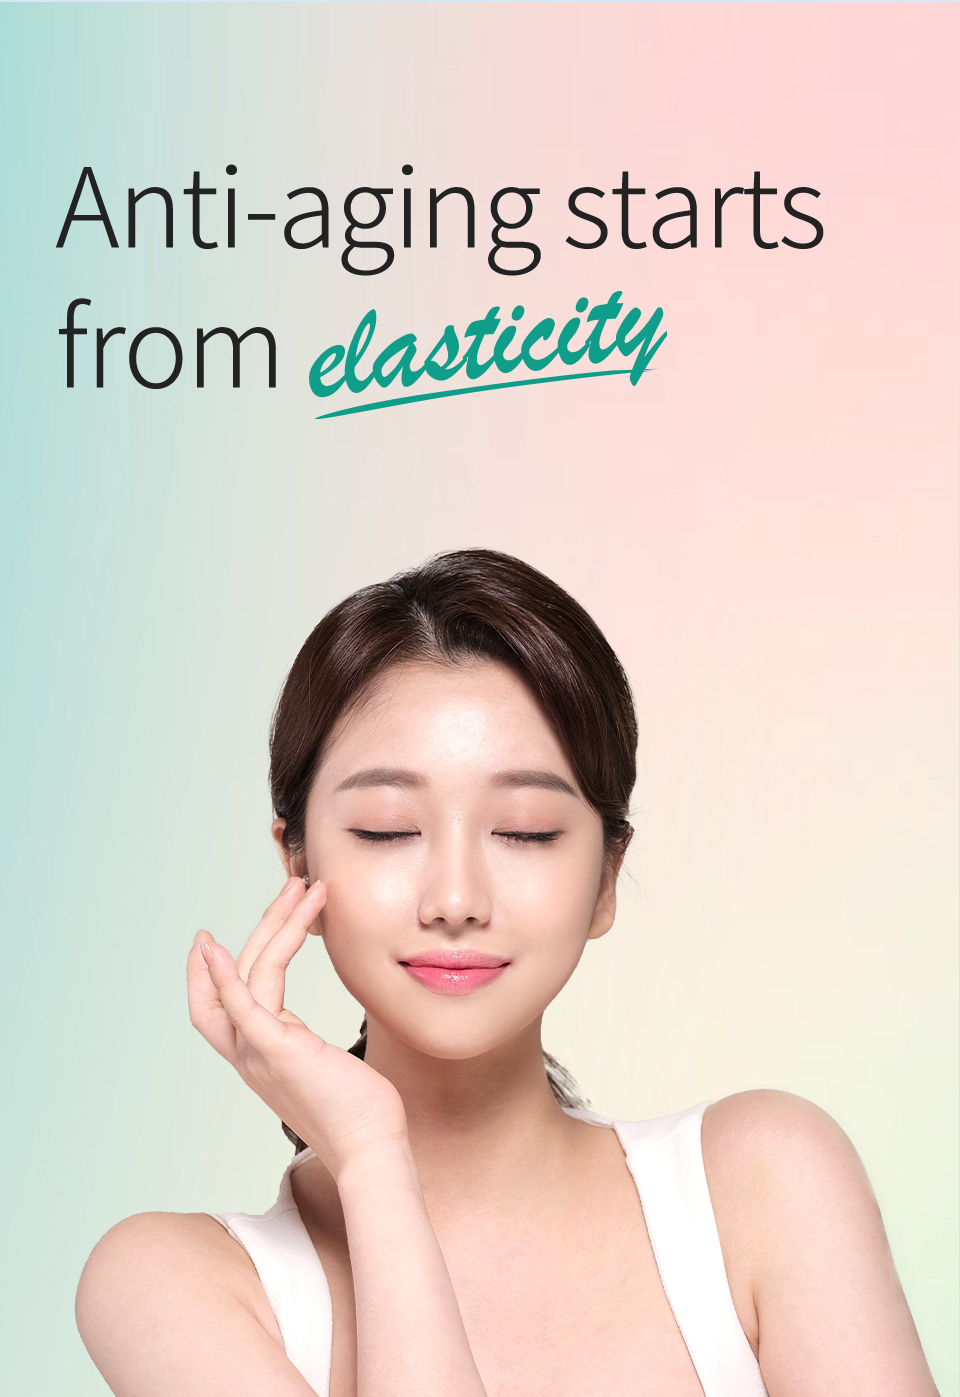 Anti-aging starts from elasticity